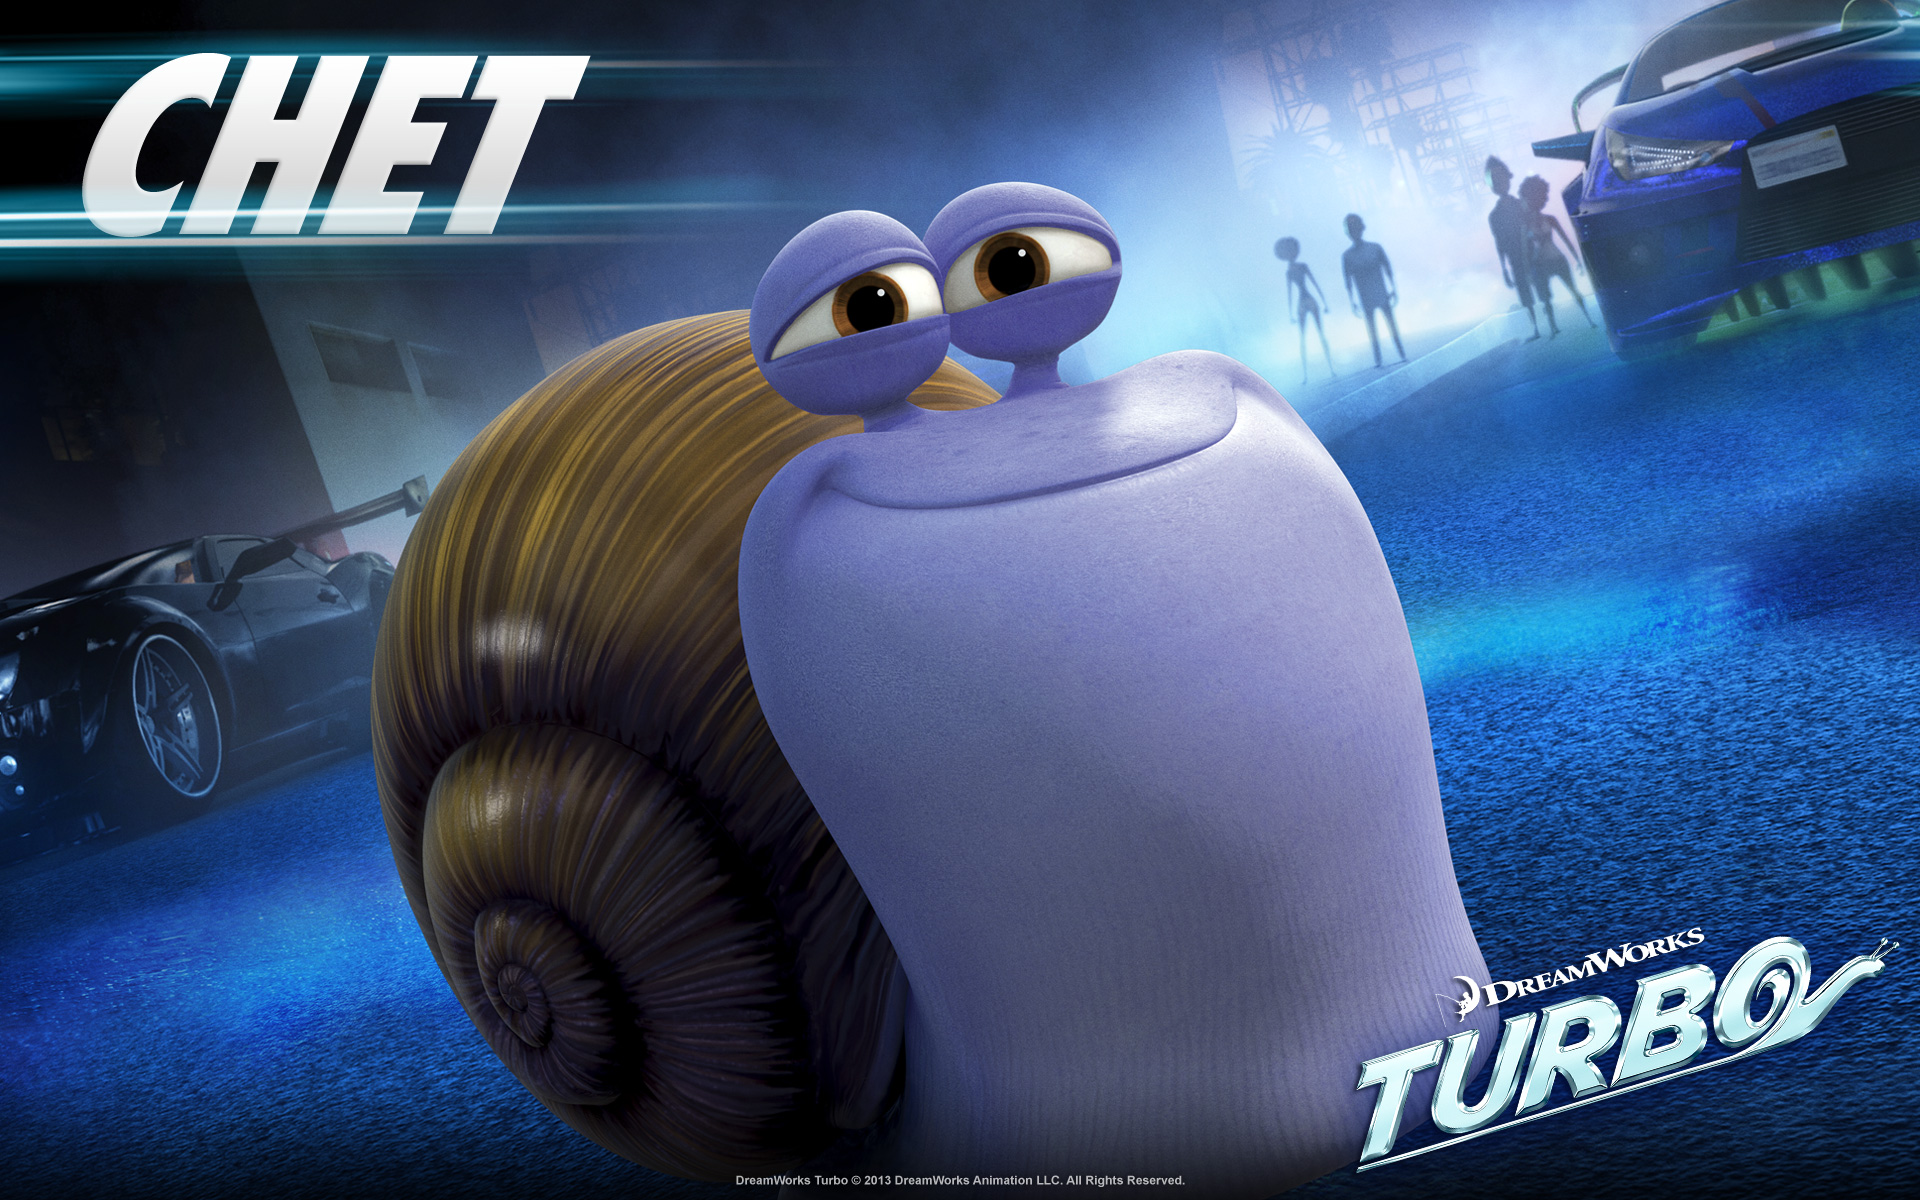 Related Wallpapers From Monster Inc Wallpaper Hd - Chet Turbo , HD Wallpaper & Backgrounds